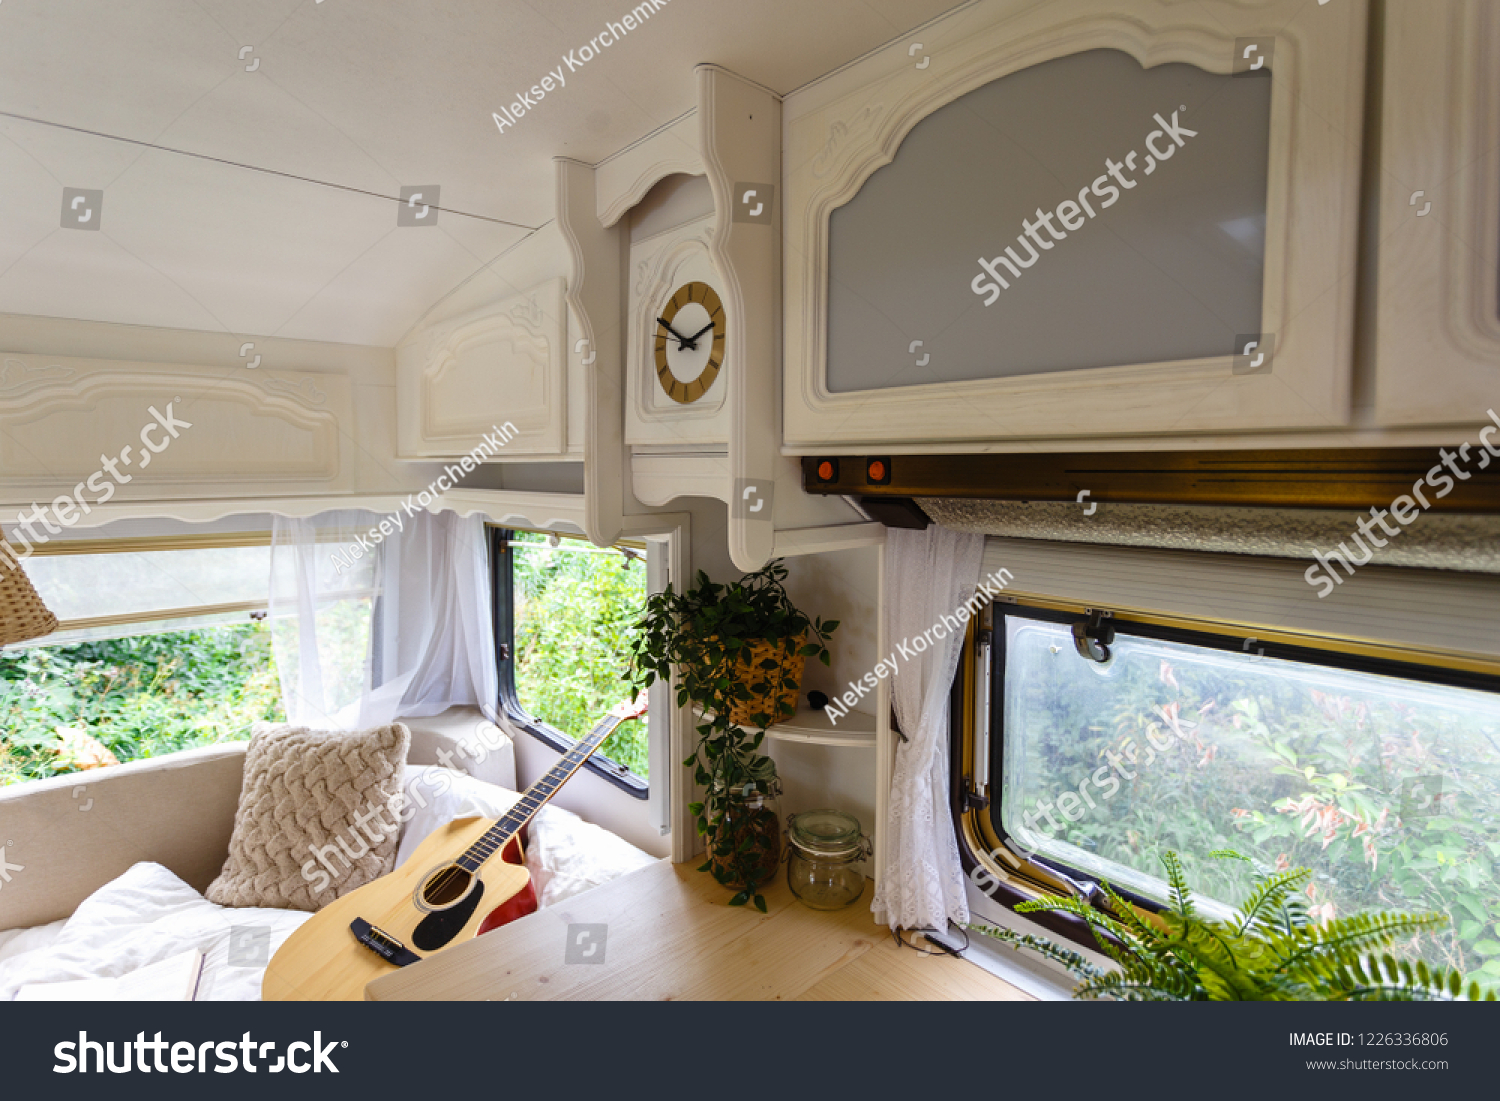 Inside Camper Van Unfilled Bed Pillows Stock Photo Edit Now